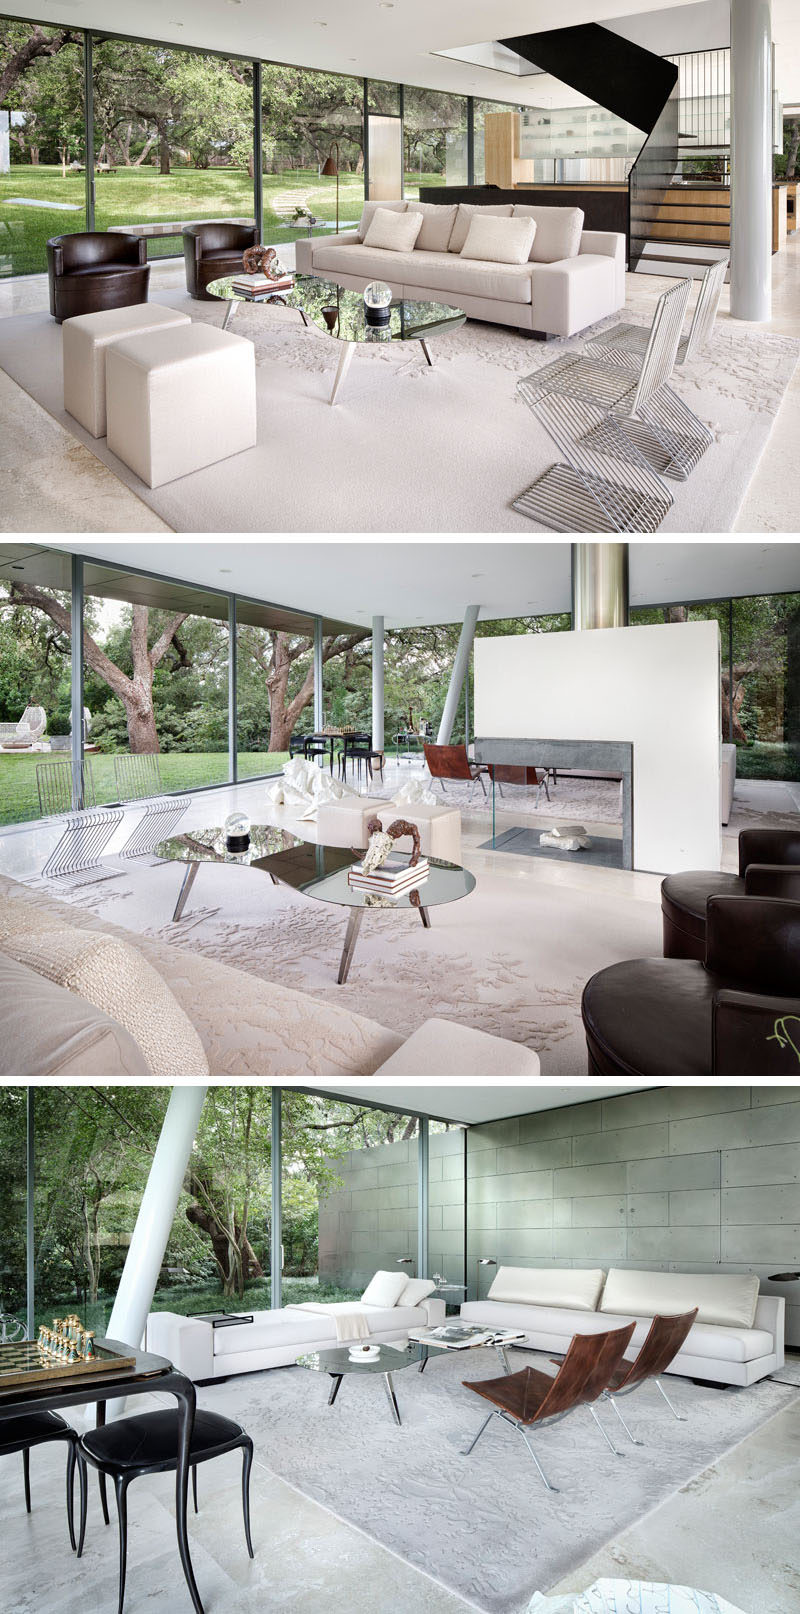 In this modern house there's a double-sided fireplace that can be enjoyed from two different sitting areas.